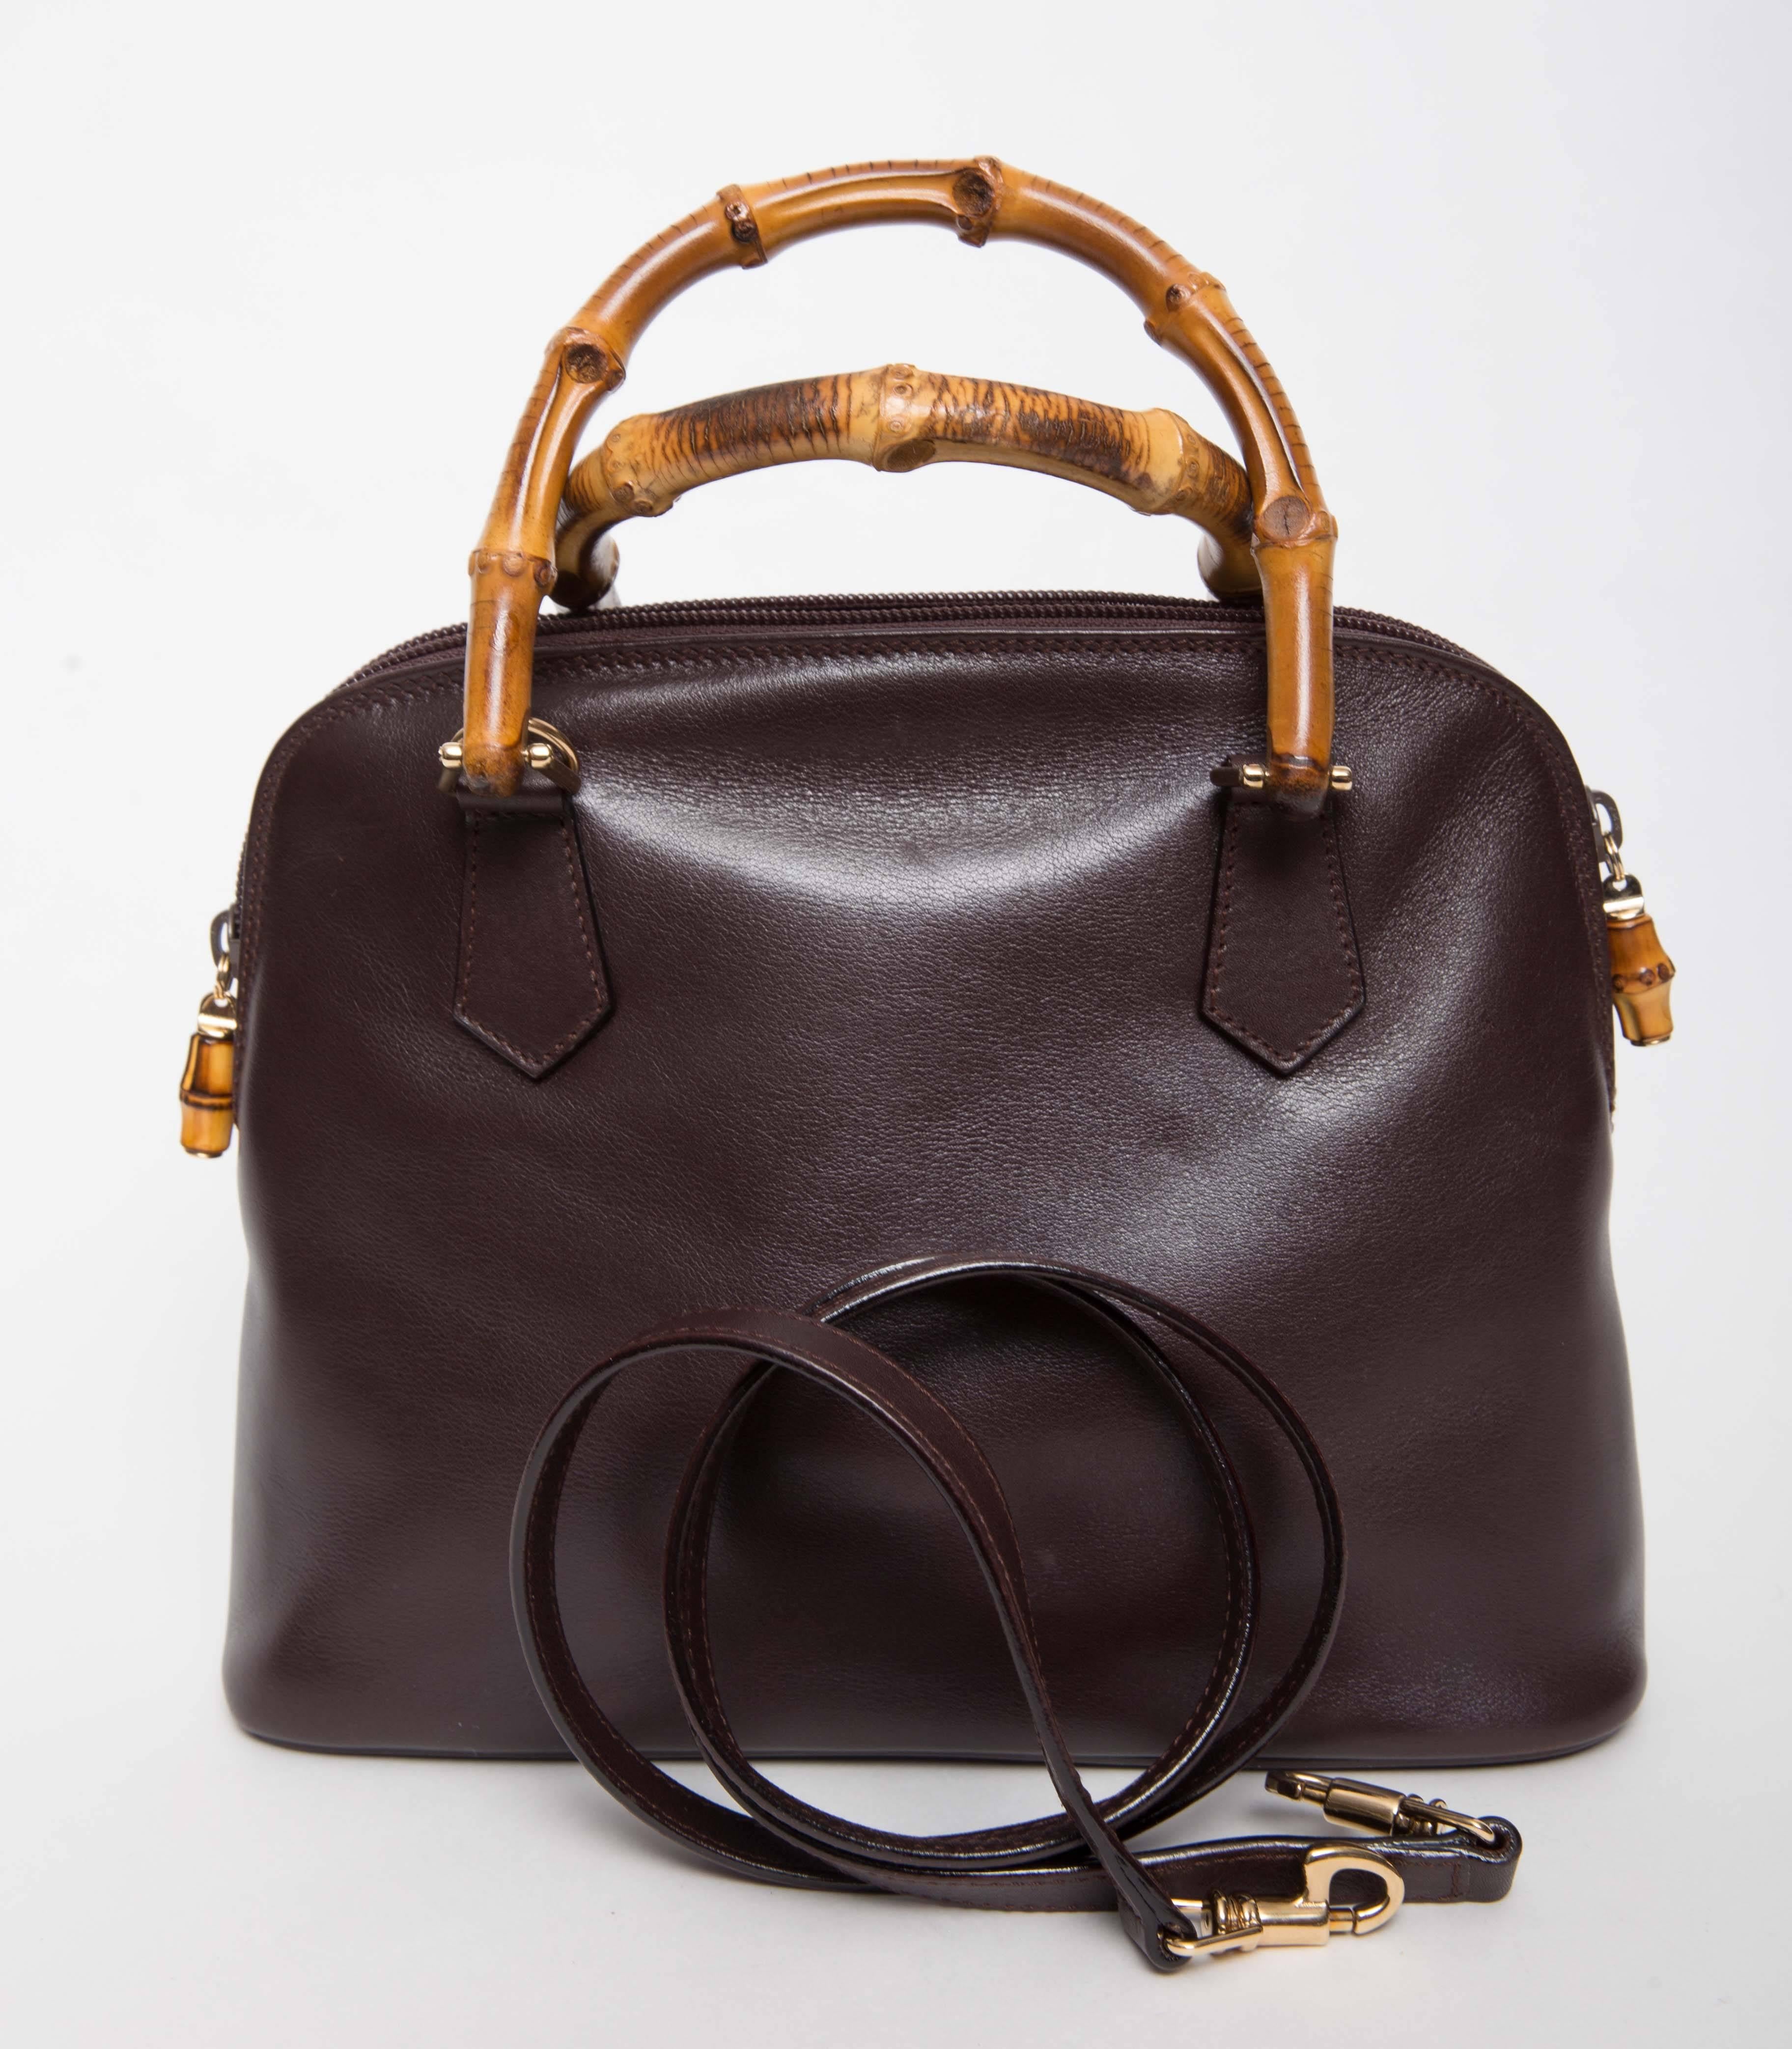  Gucci Vintage Alma Tote in Dark Brown Leather with Bamboo Handles 2